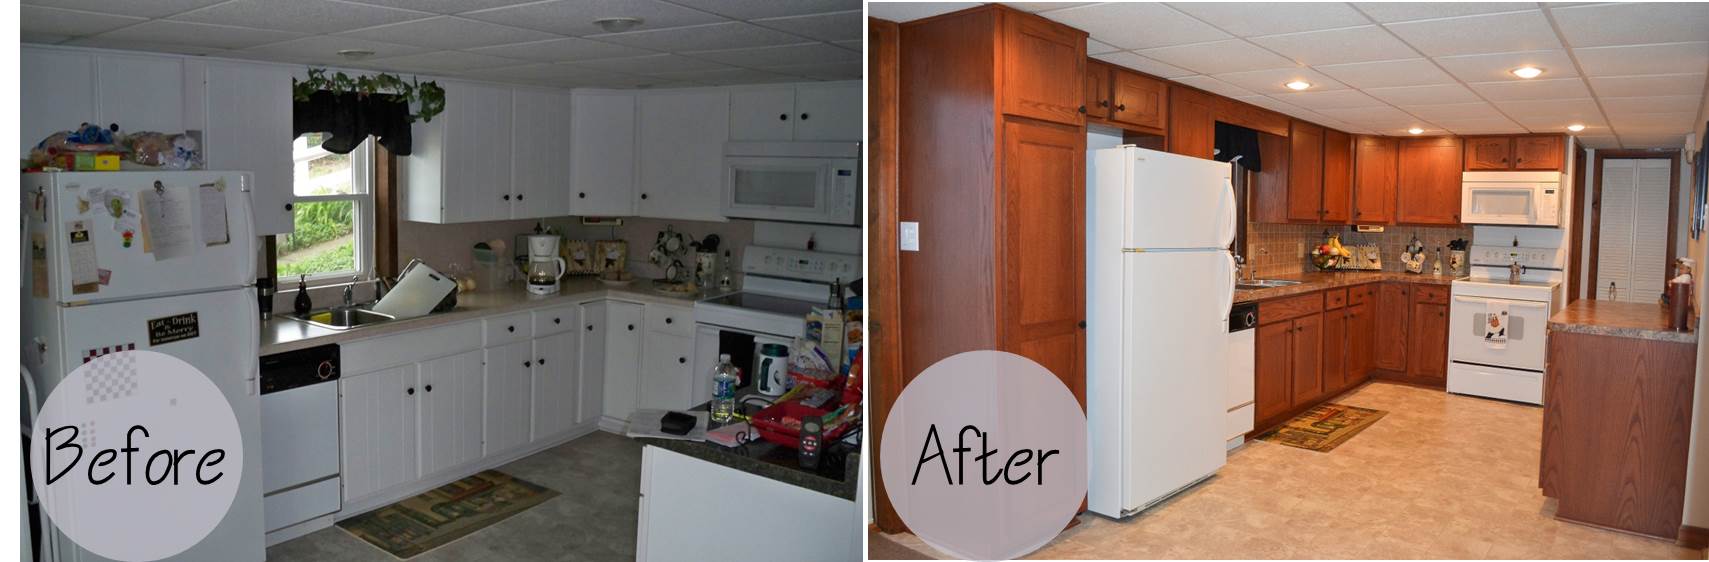 Cabinet Refacing Bucks County Pa Kitchen Cabinet Refacers